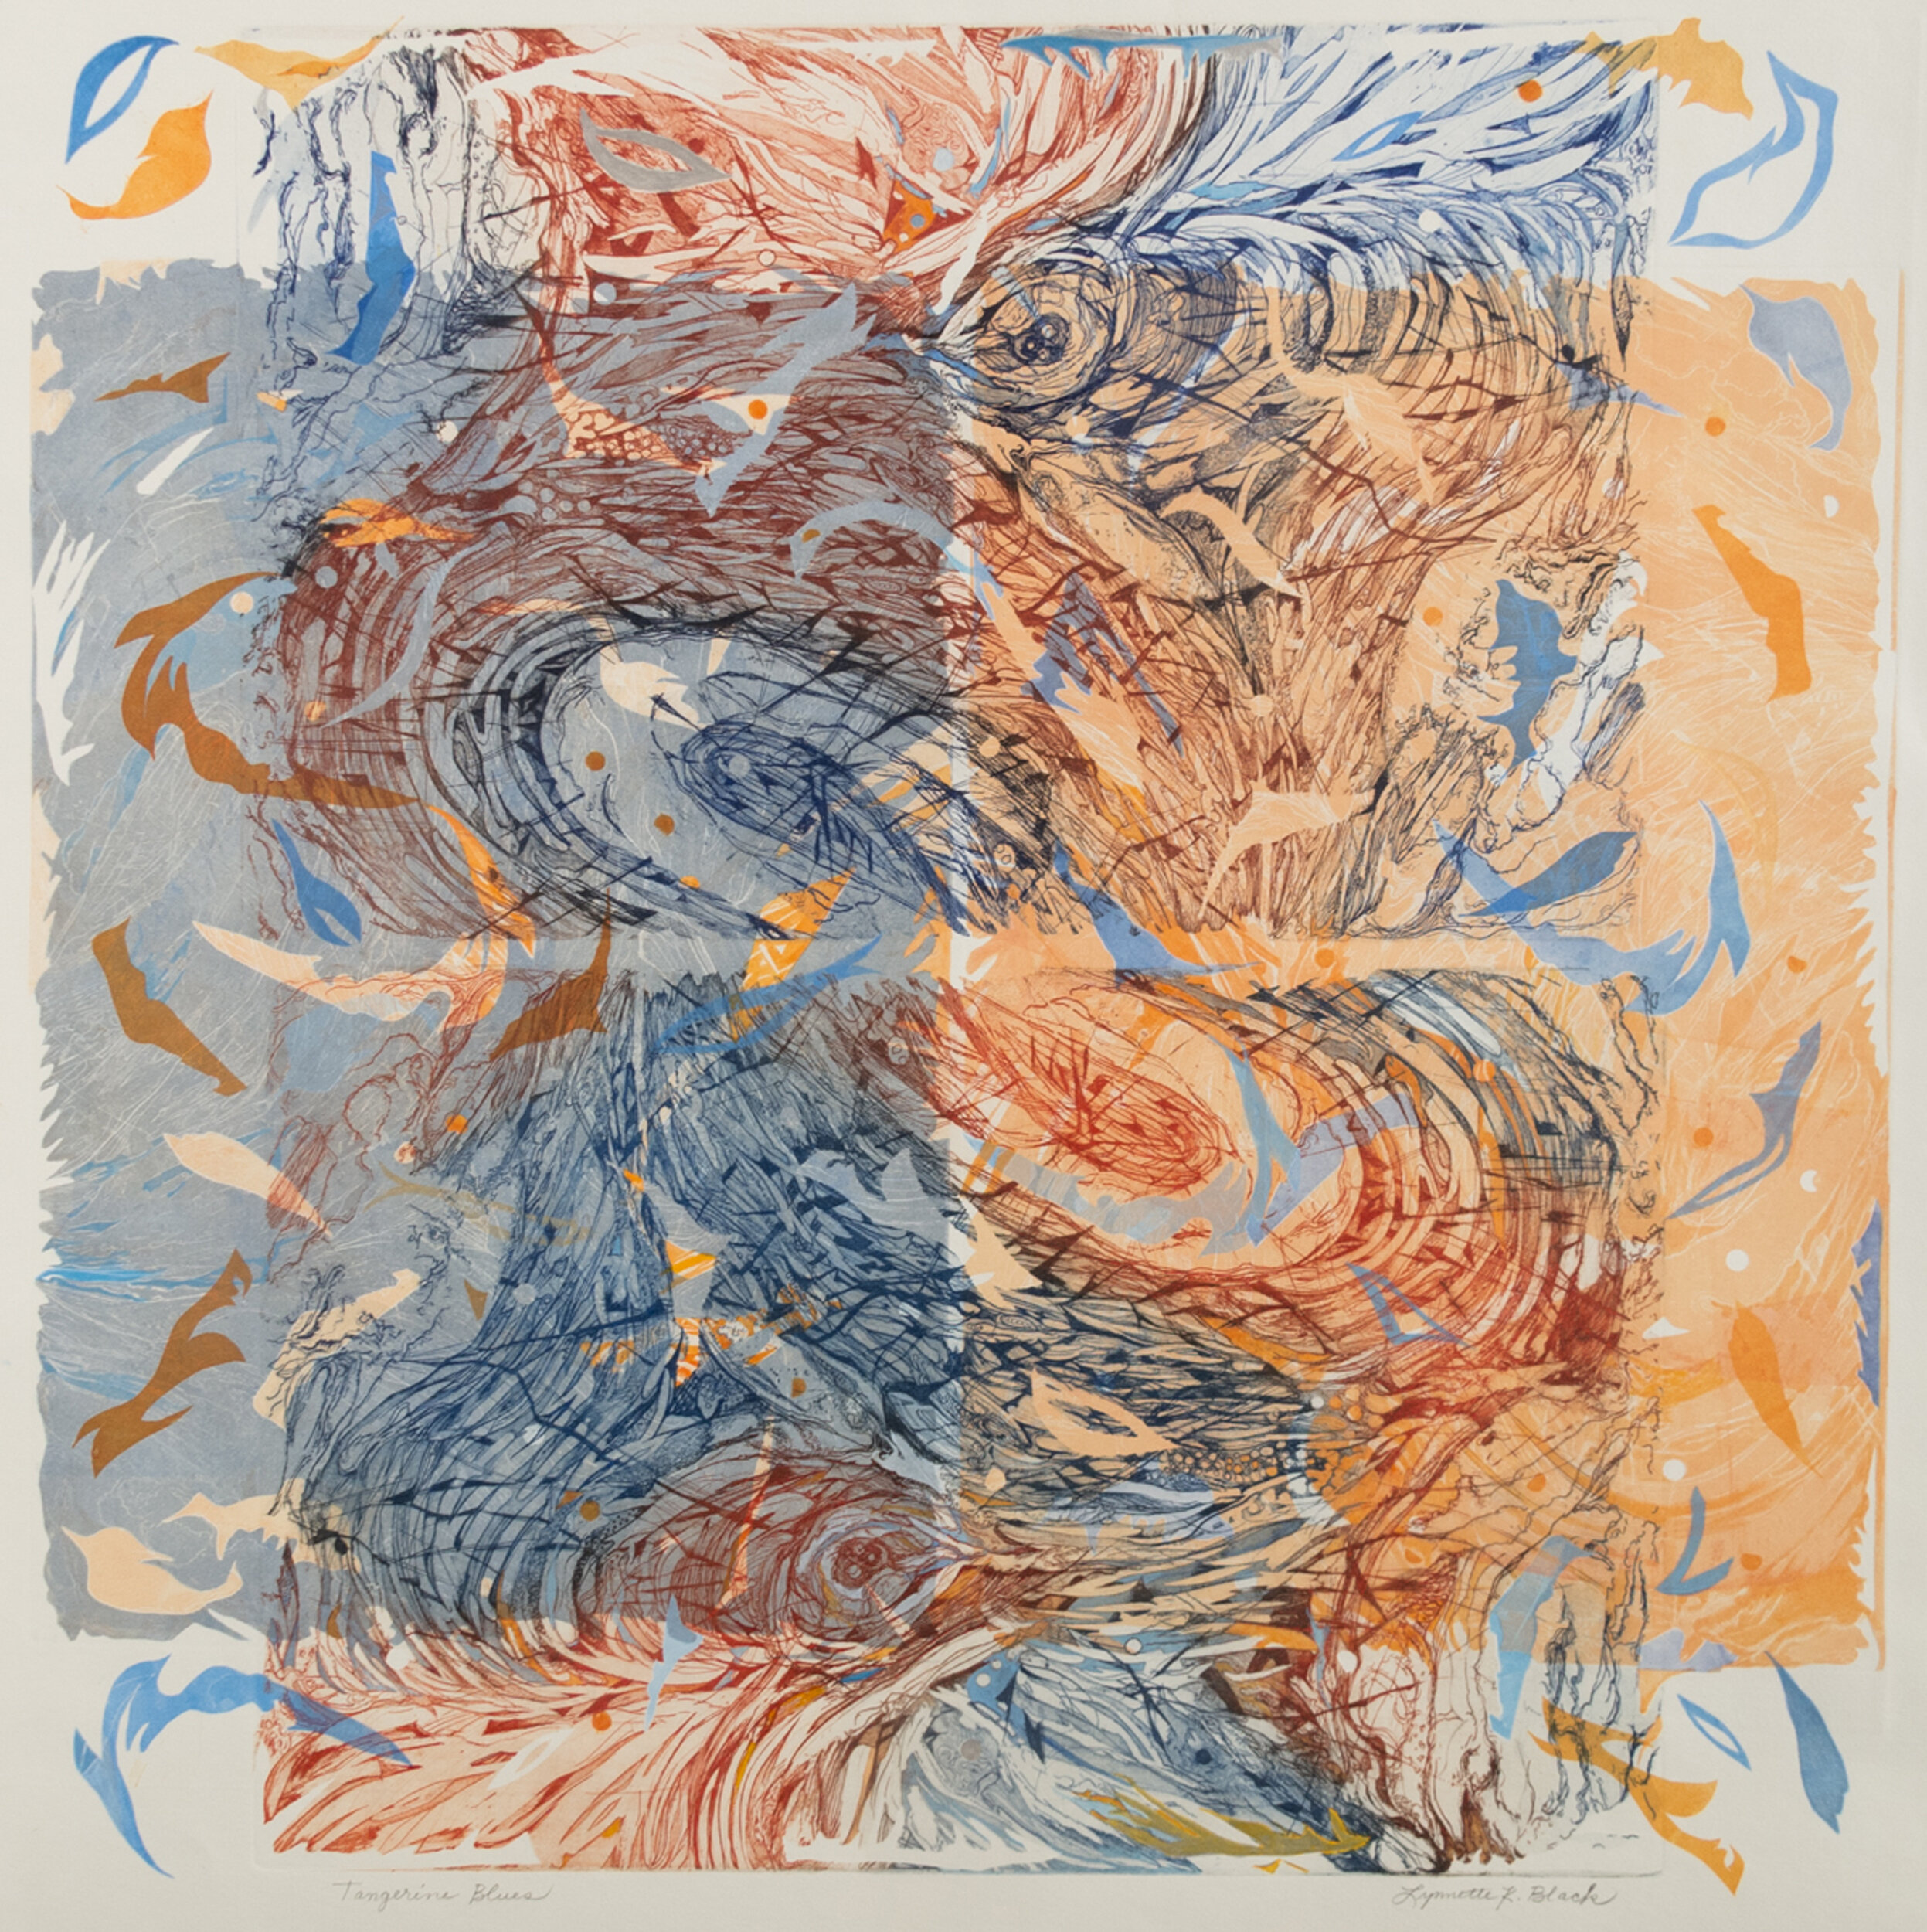 Lynnette Black; Tangerine Blues; intaglio and relief